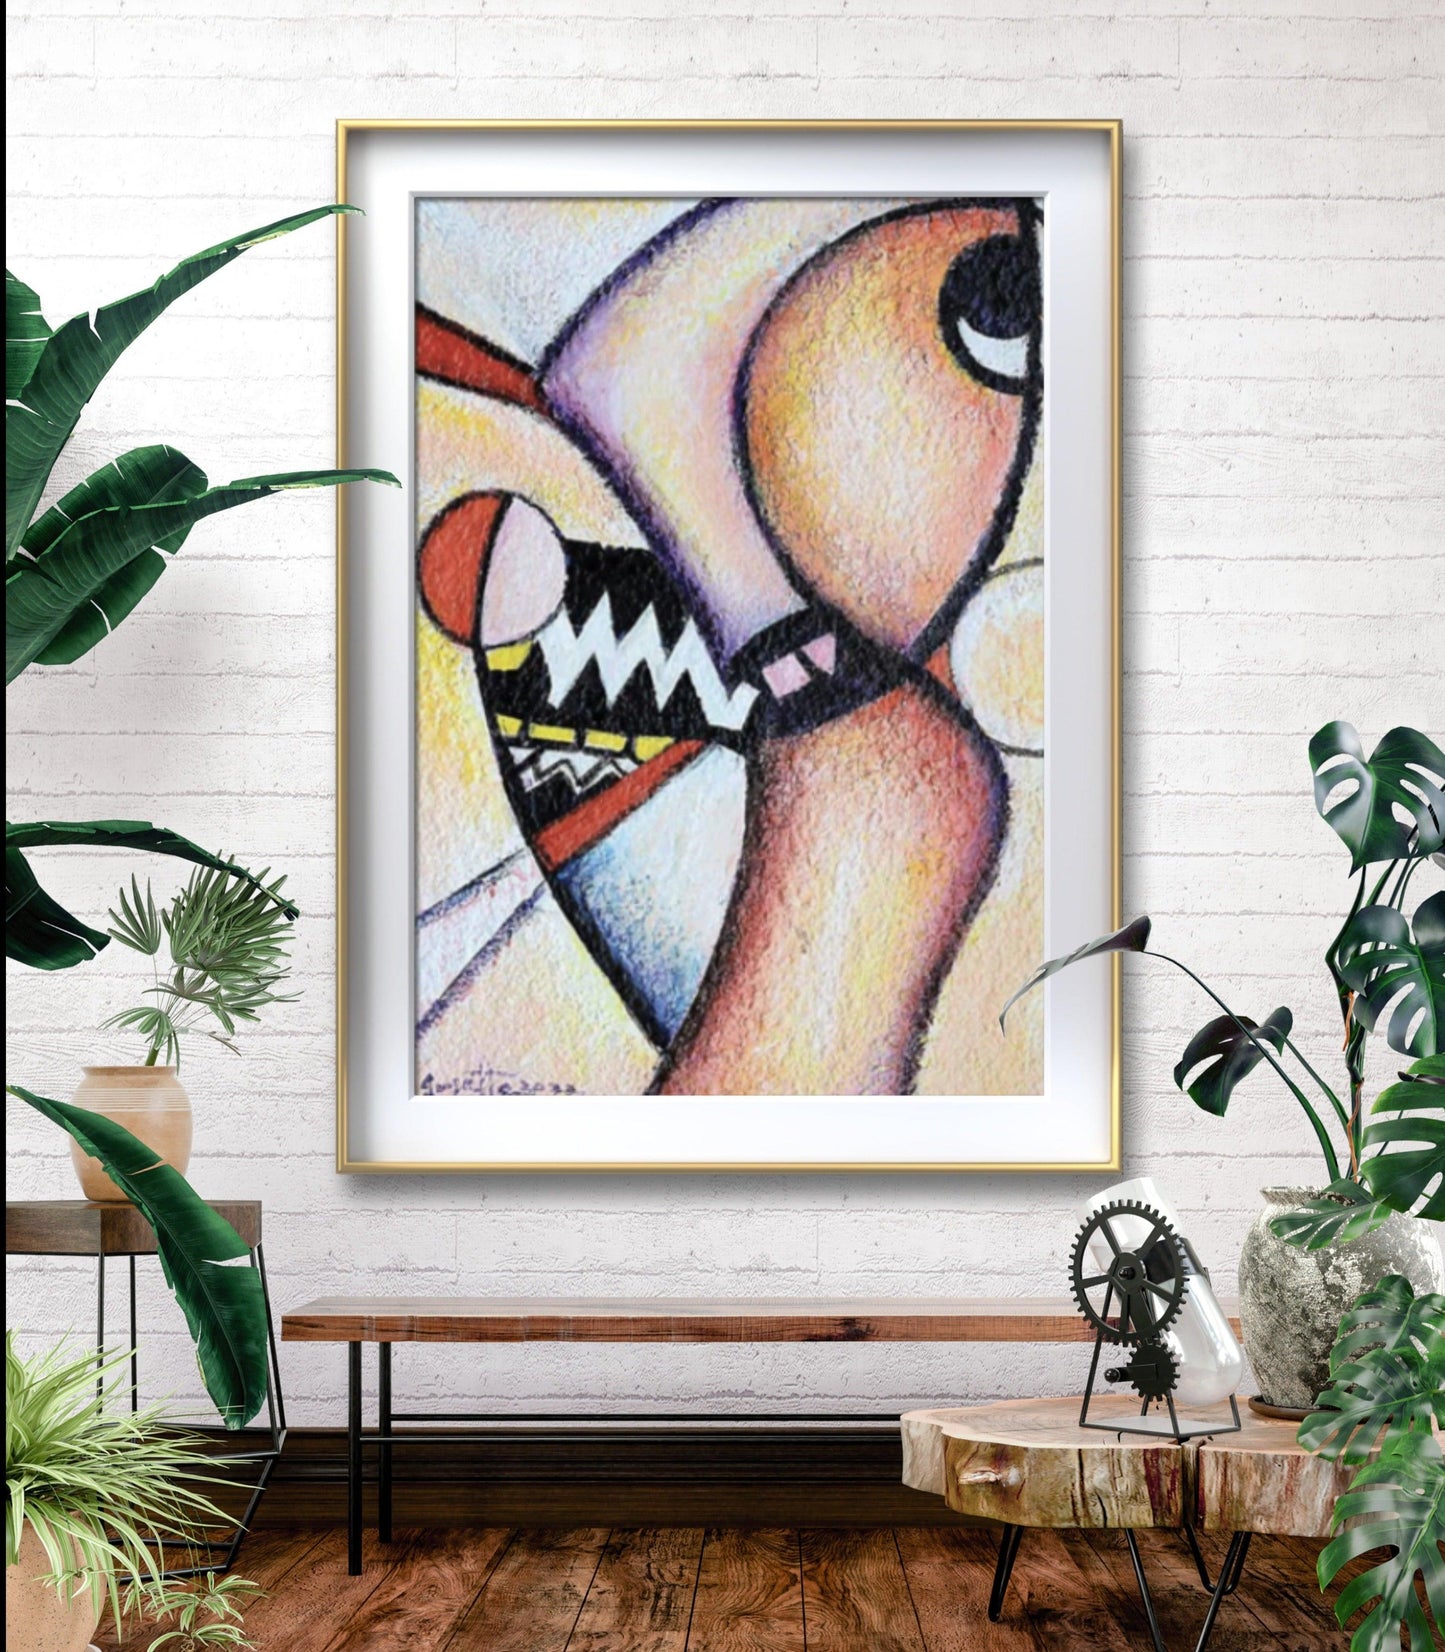 Tribal Hybrid by Robert Joyette, fine art print using vegan materials, museum quality, offered by Tree of Life Art, showcasing intricate tribal themes.